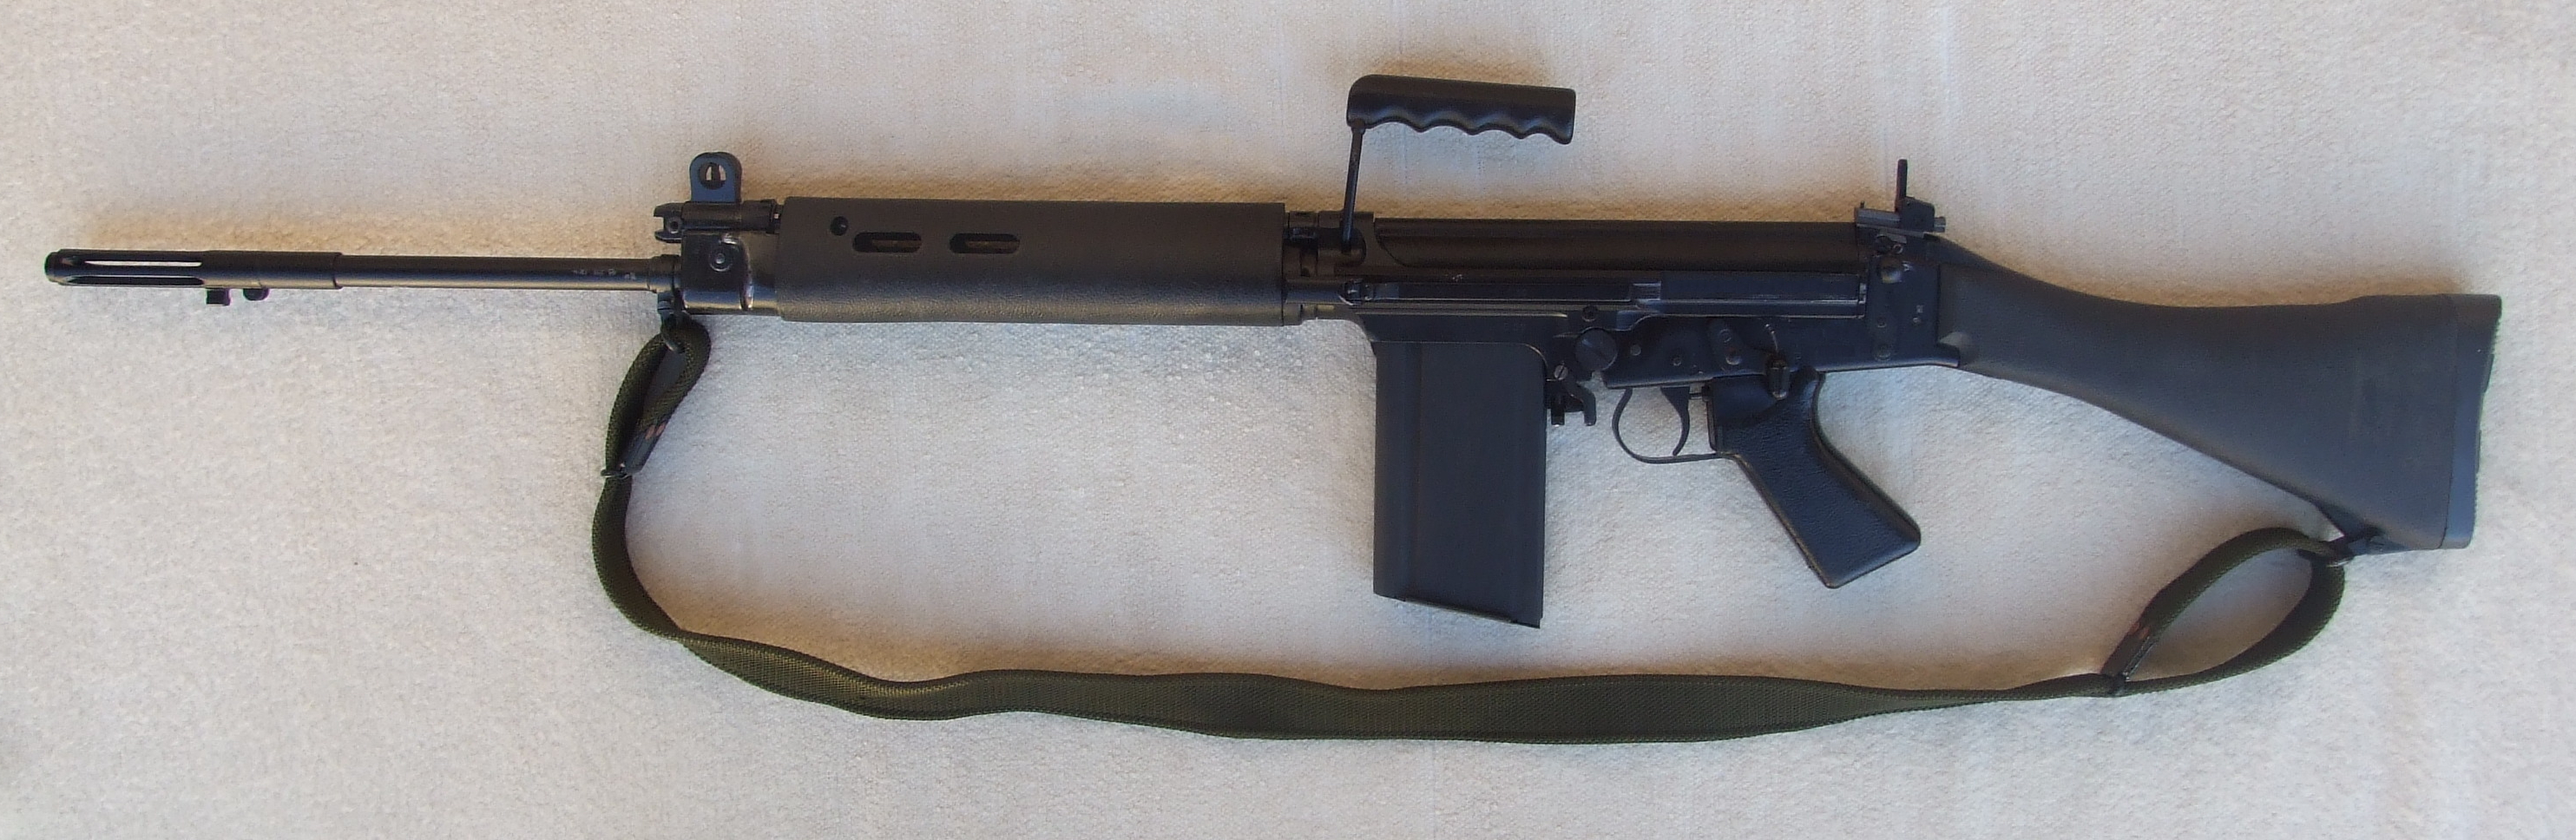      India Ordinance Factory Board (OFB)

India's old Semi-Automatic Battle-Rifle FN FAL 7.62mm .30Caliber (Belgium_FN), licensed manufactured in India 